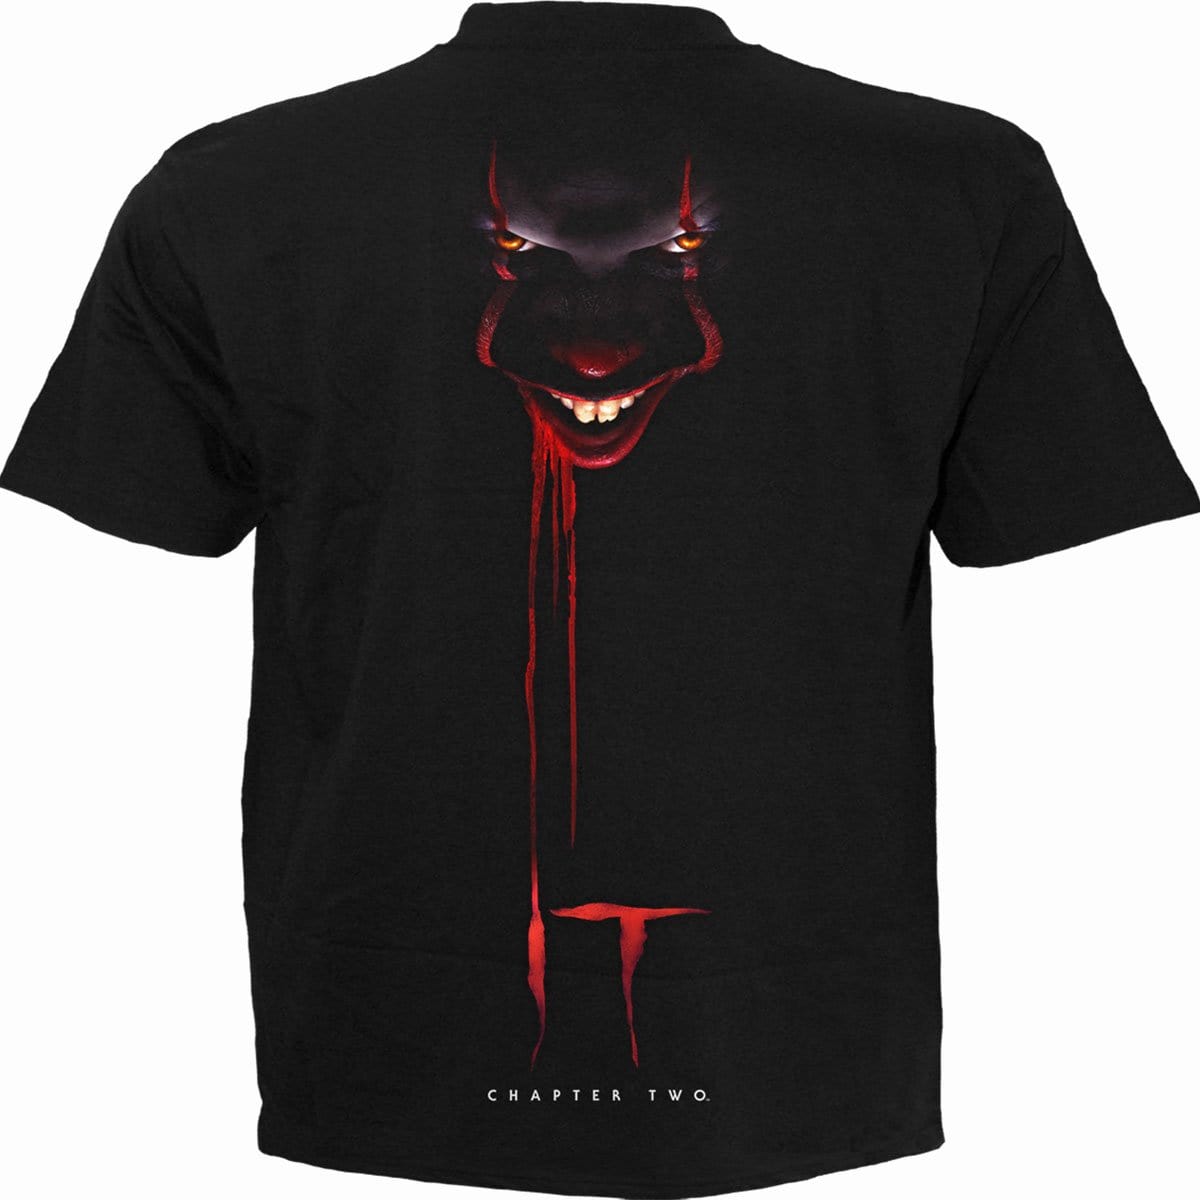 IT - PENNYWISE - T-Shirt Black - Spiral USA